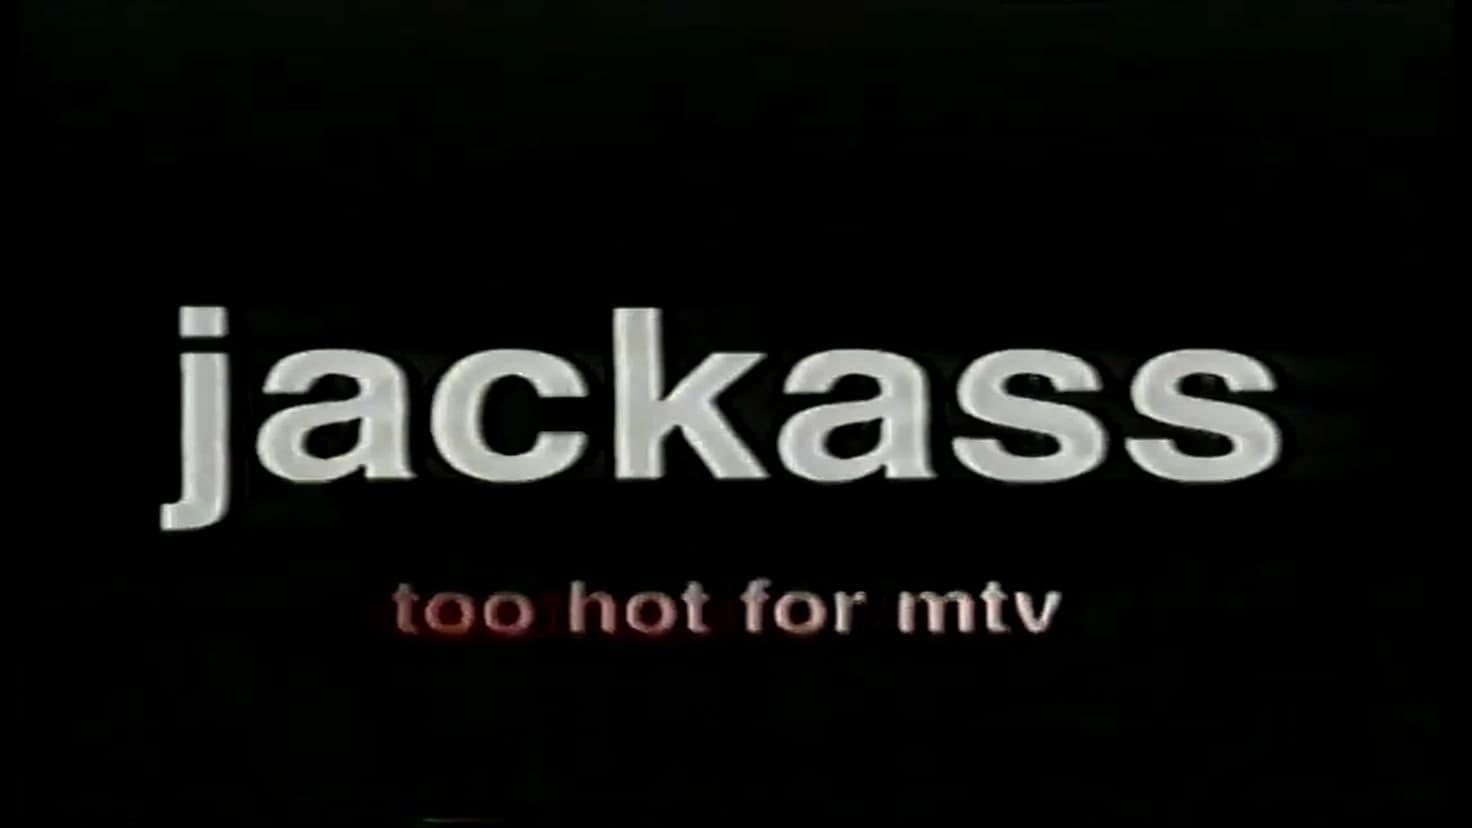 Jackass: Too Hot For MTV backdrop